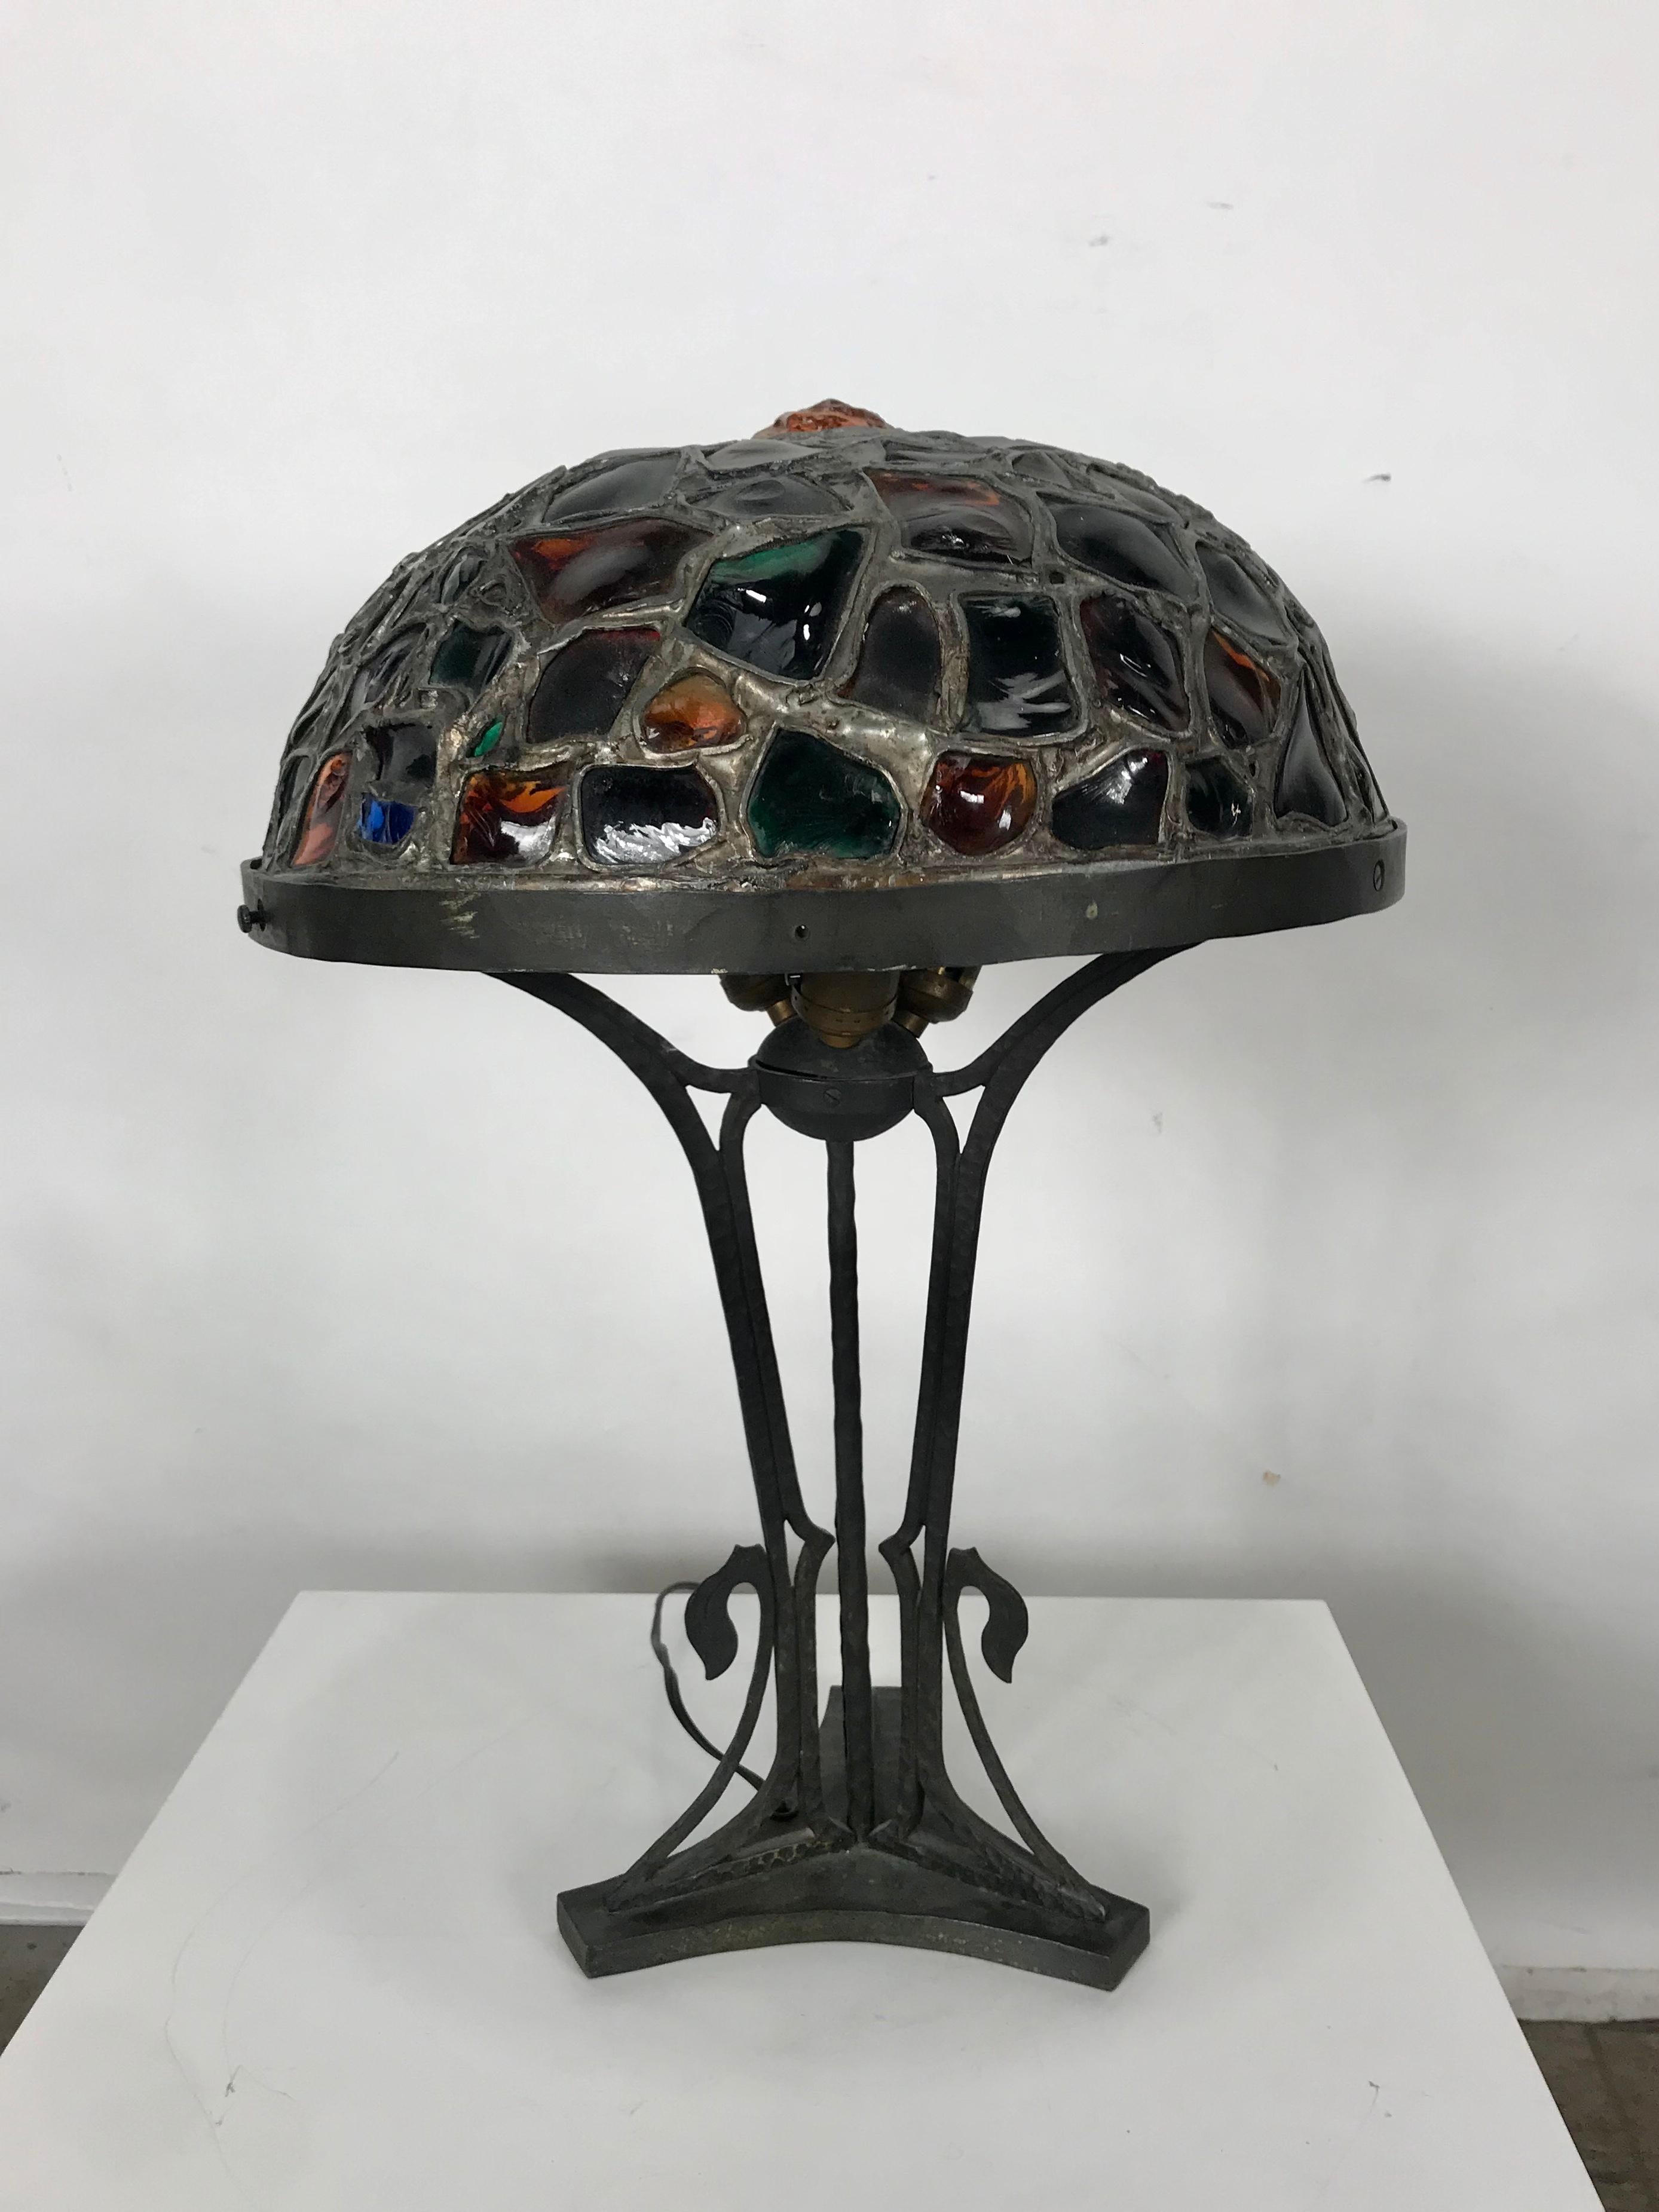 Austrian Art Nouveau bronze chunk glass table lamp, cast bronze with inserted chunk glass jewels in the shade, made in Austria in the 1900s, rewired. Wonderful patina to the metal surfaces,.